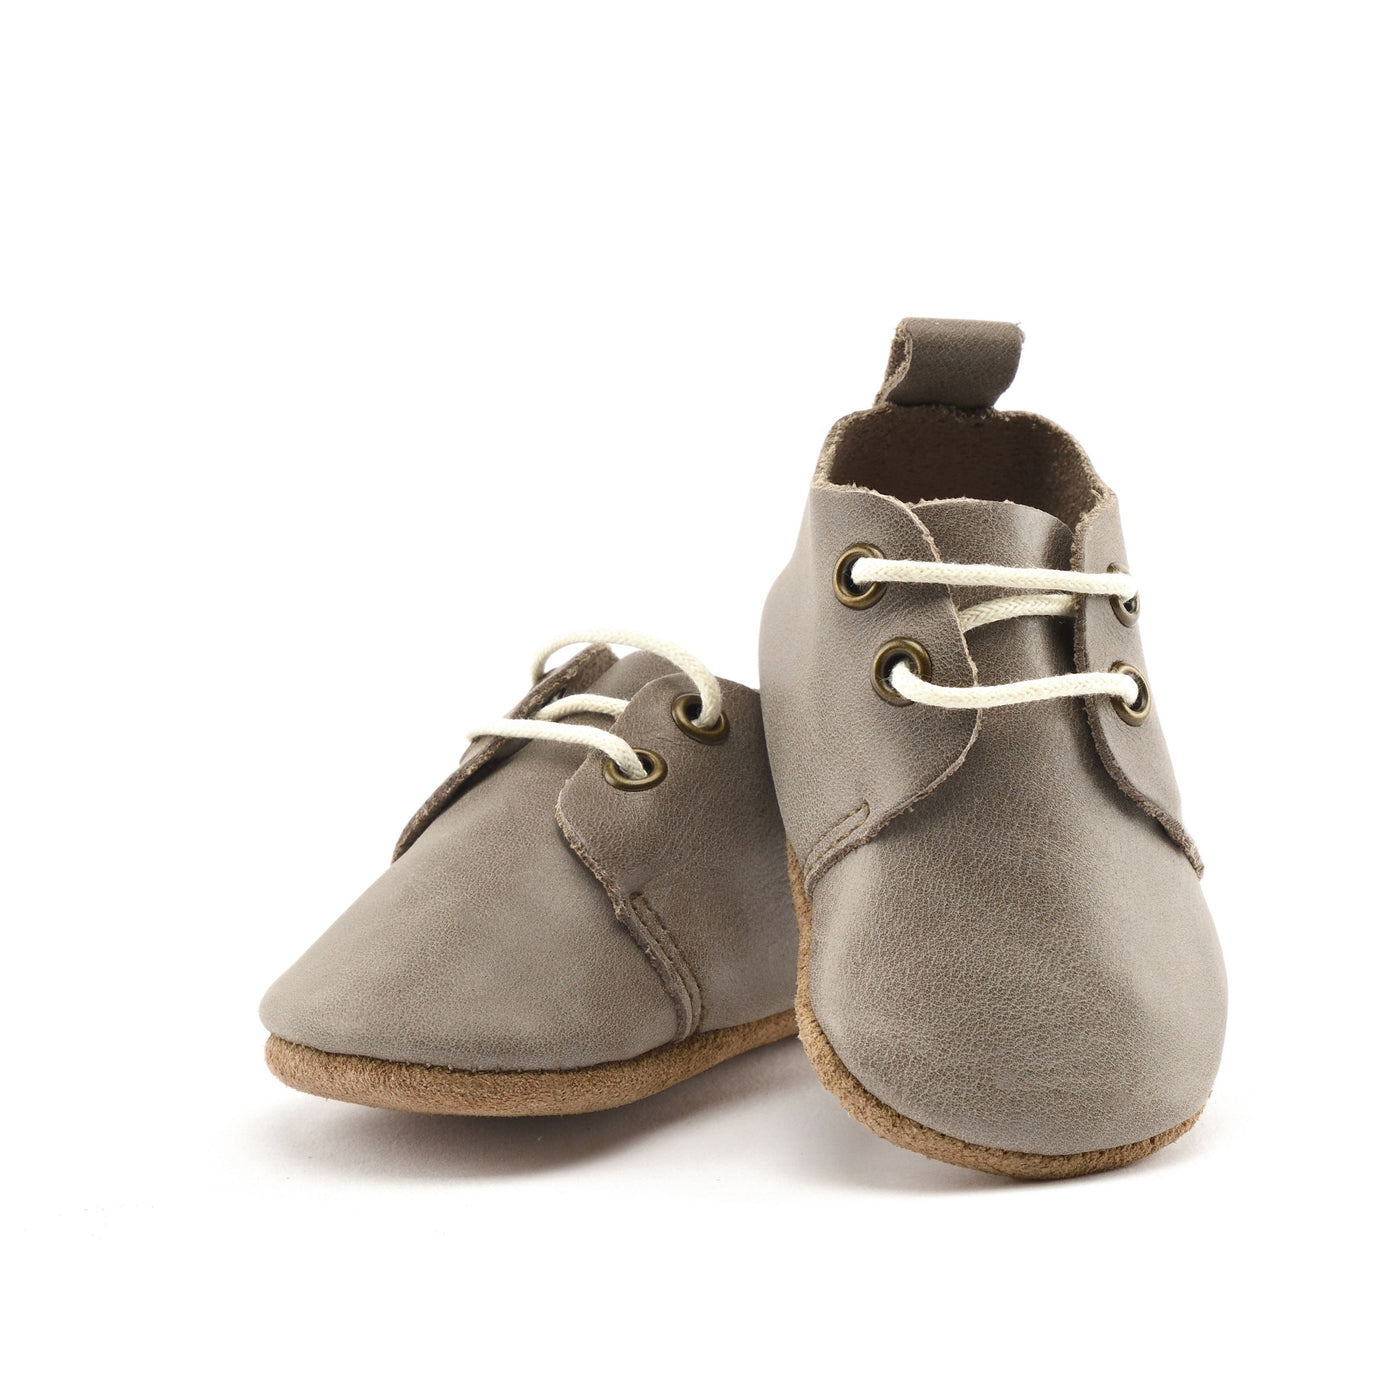 Stone - Low Top Oxfords - Soft Sole